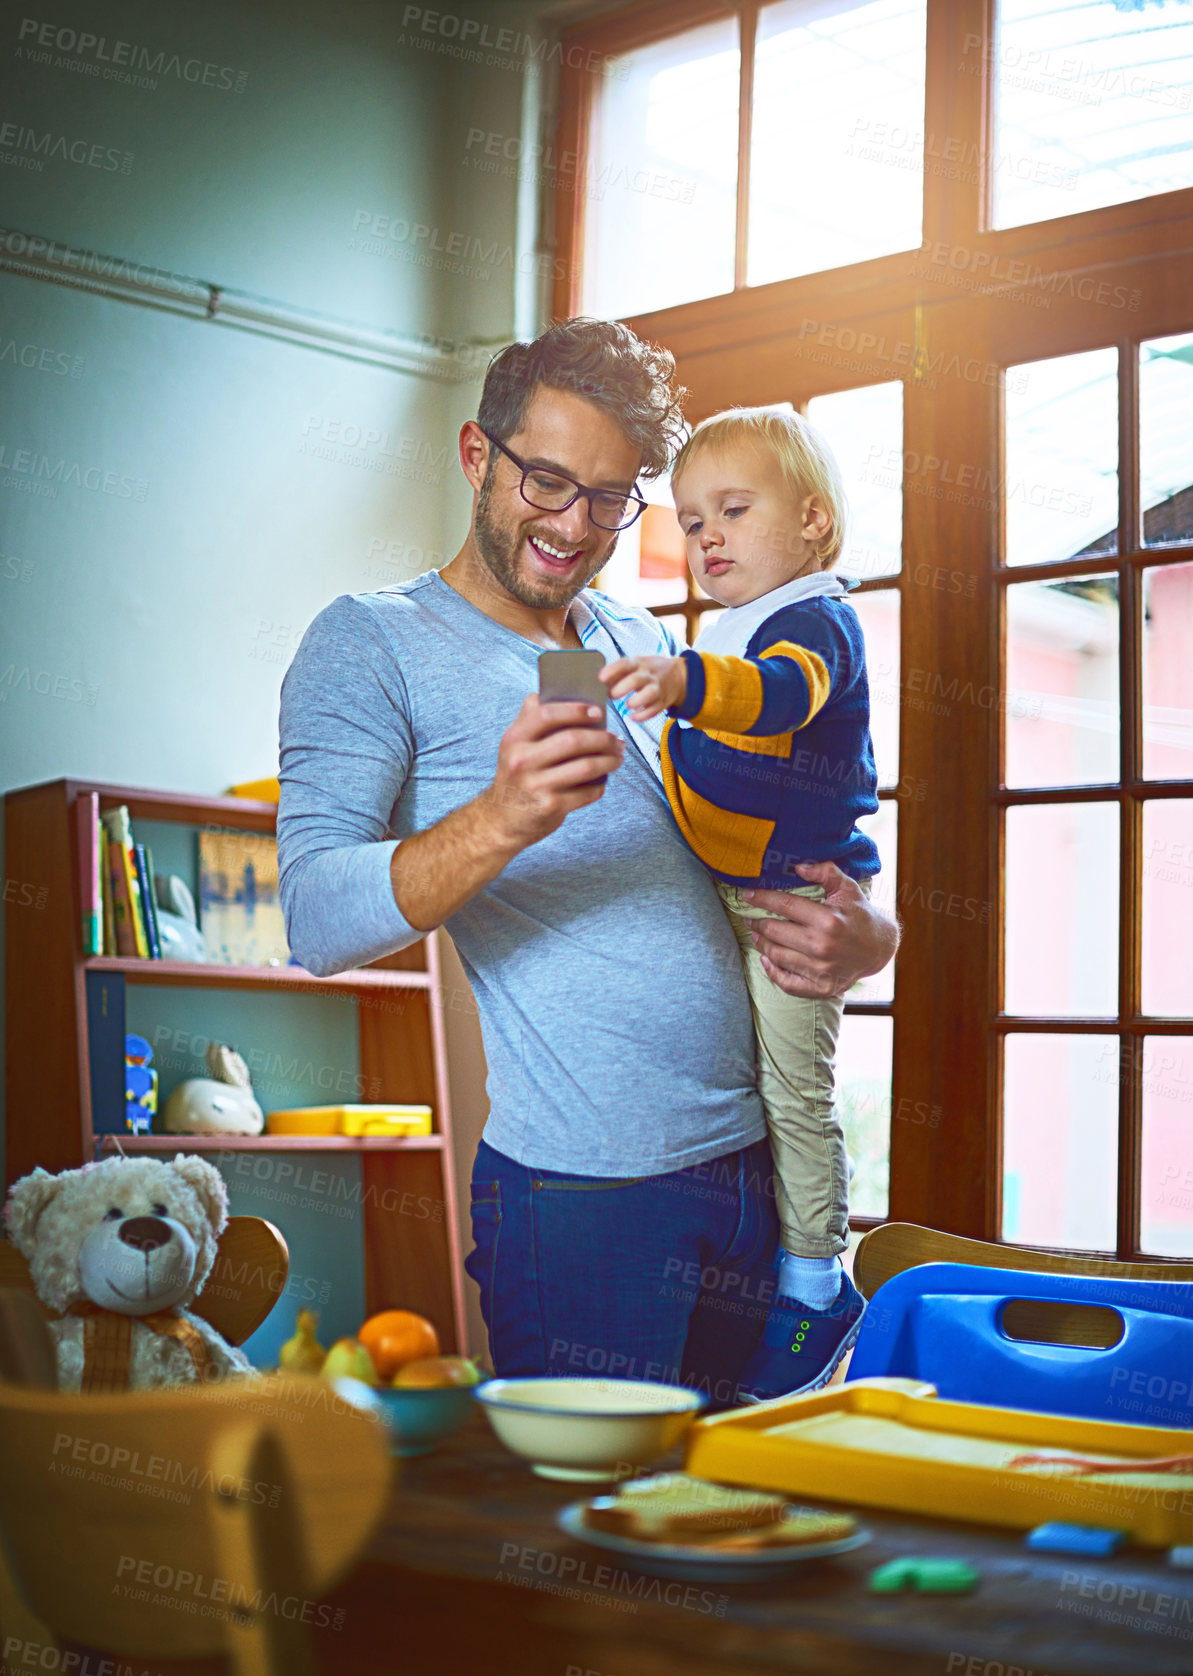 Buy stock photo Cropped shot of a single father using his cellphone and holding his son at home